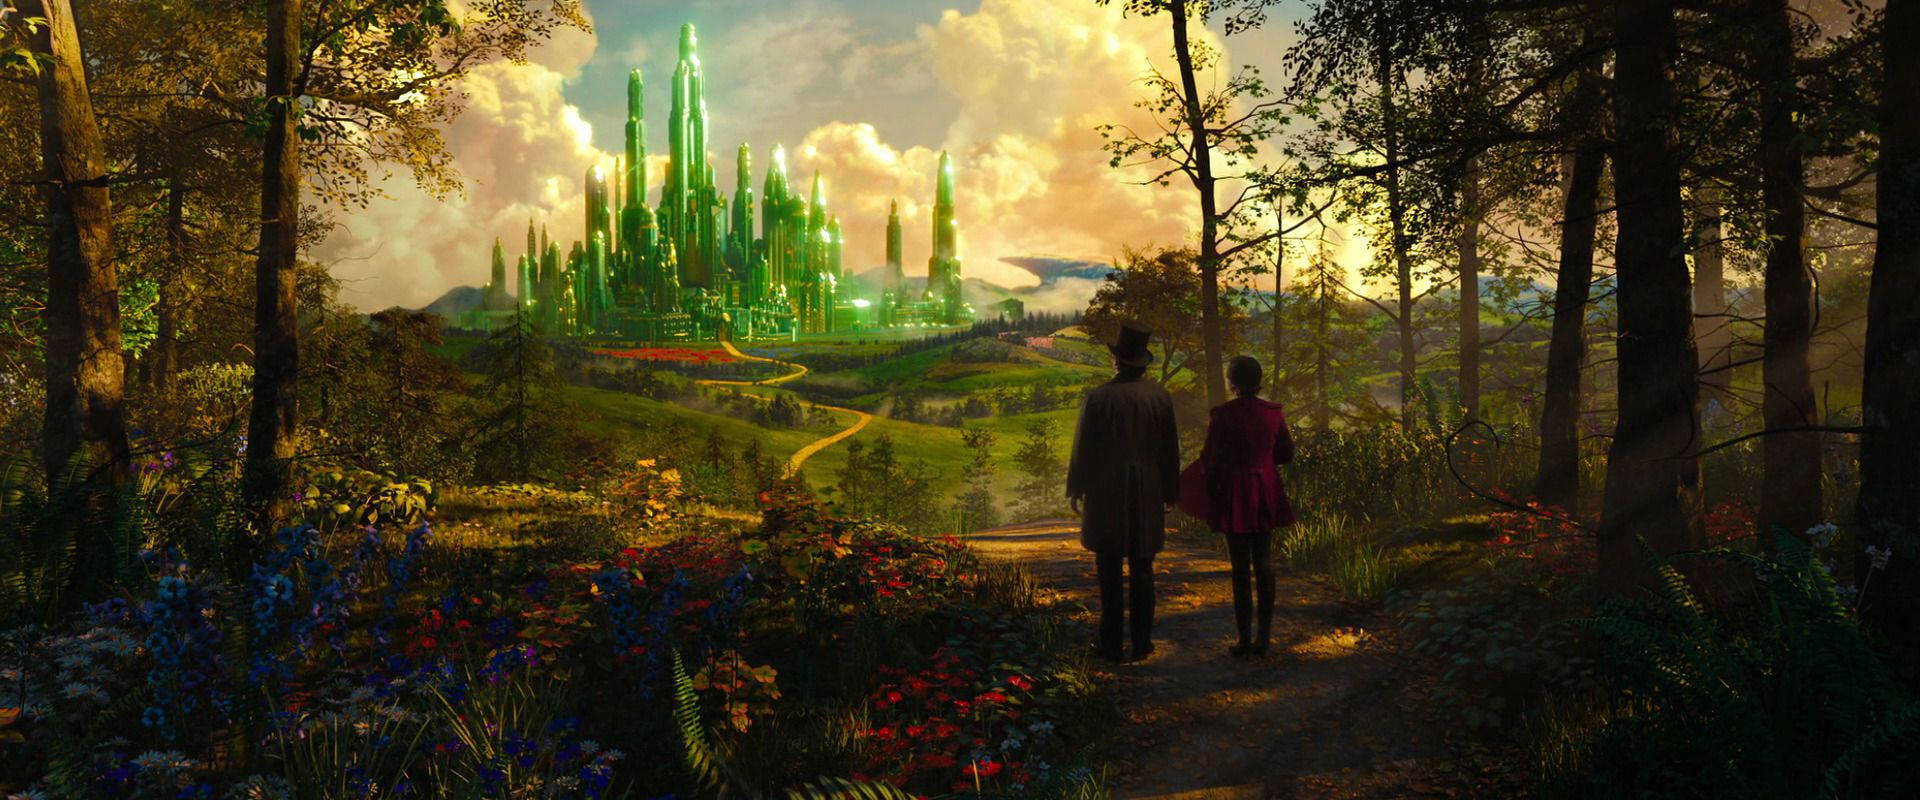 Oz The Great And Powerful 2013 Film Background